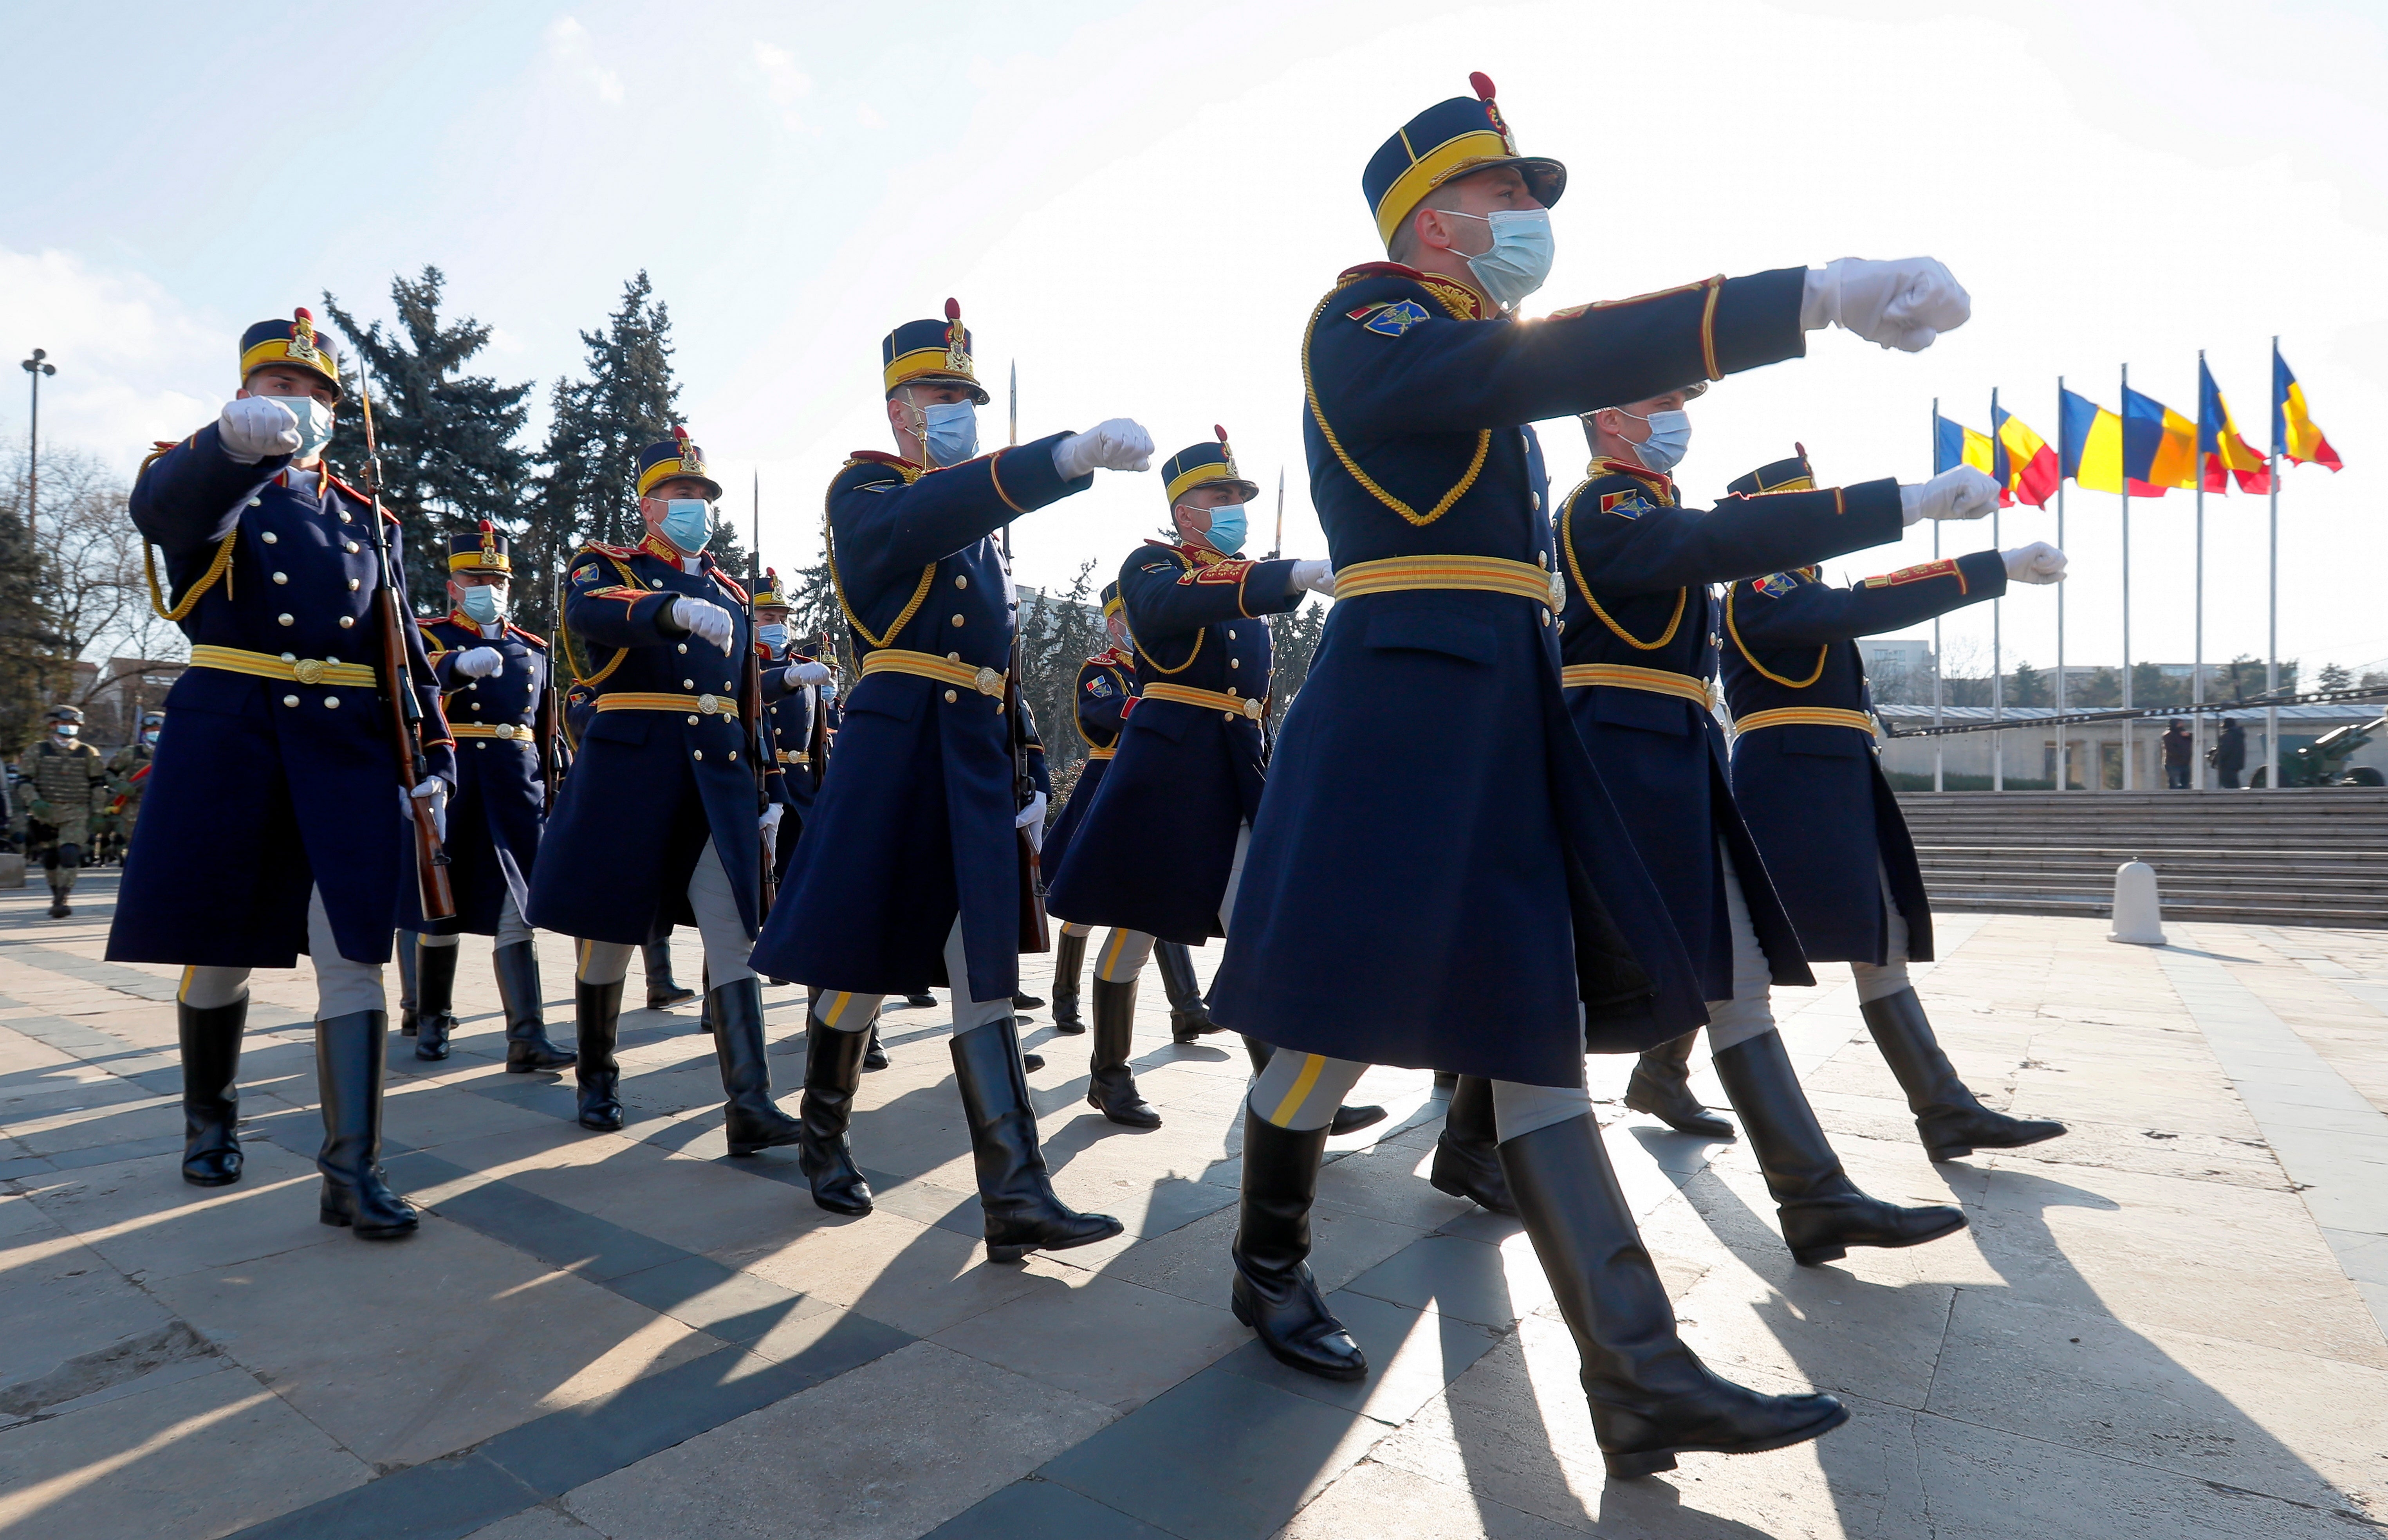 Romanian presidential honour guard soldiers march during a military ceremony held to mark Romania’s Little Union Day at the Tomb of the Unknown Soldier Memorial in Bucharest